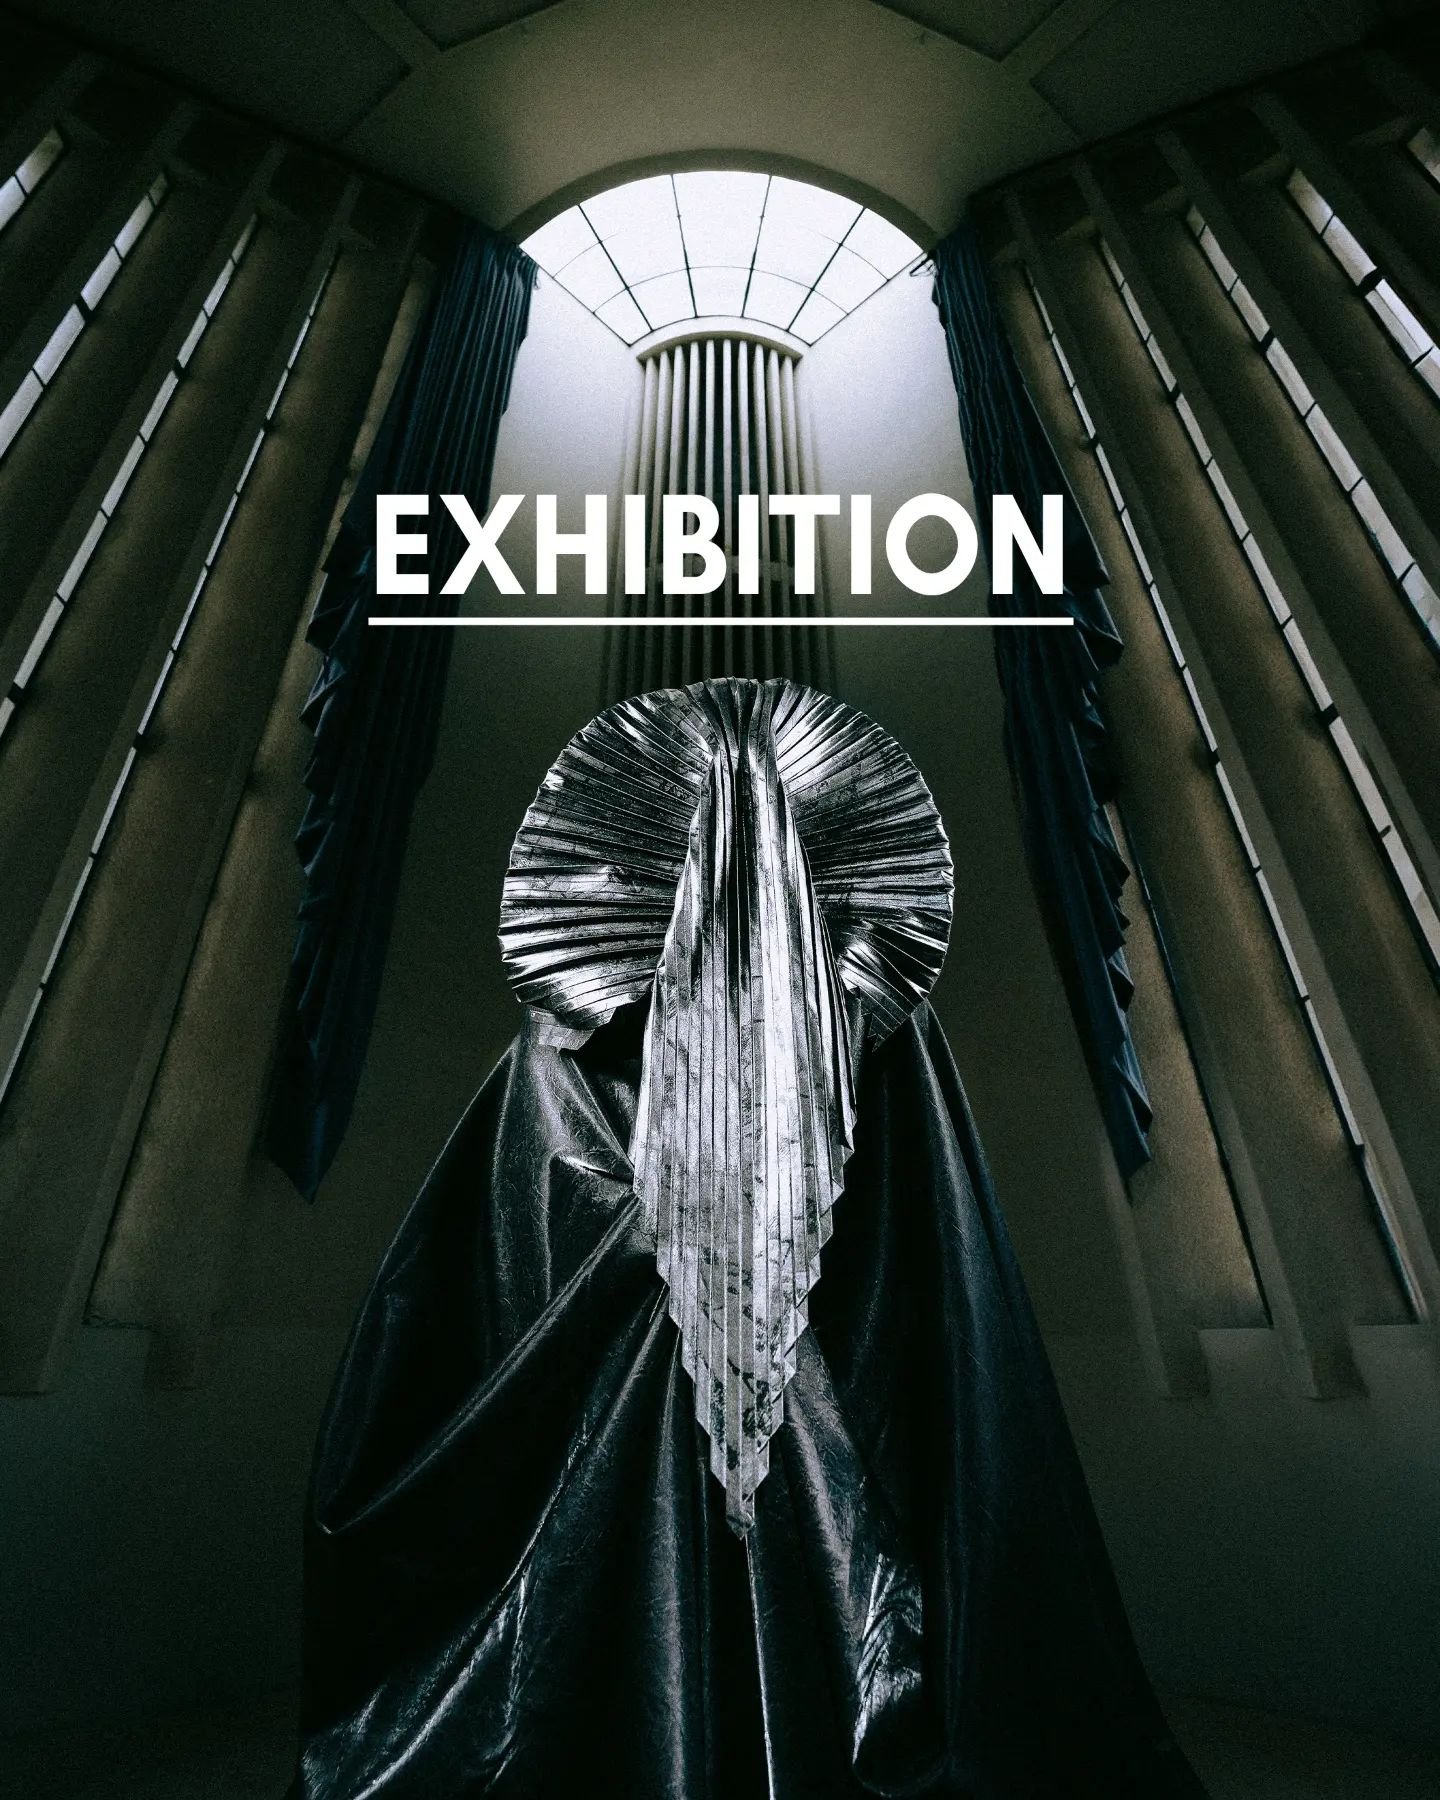 EXHIBITION ϟ

On saturday the 1st of June &amp; saturday the 15th of June, I will be hosting my second solo exhibition. The exhibition will mostly consist of unreleased work that I have been creating over the last few months. For me these images are 